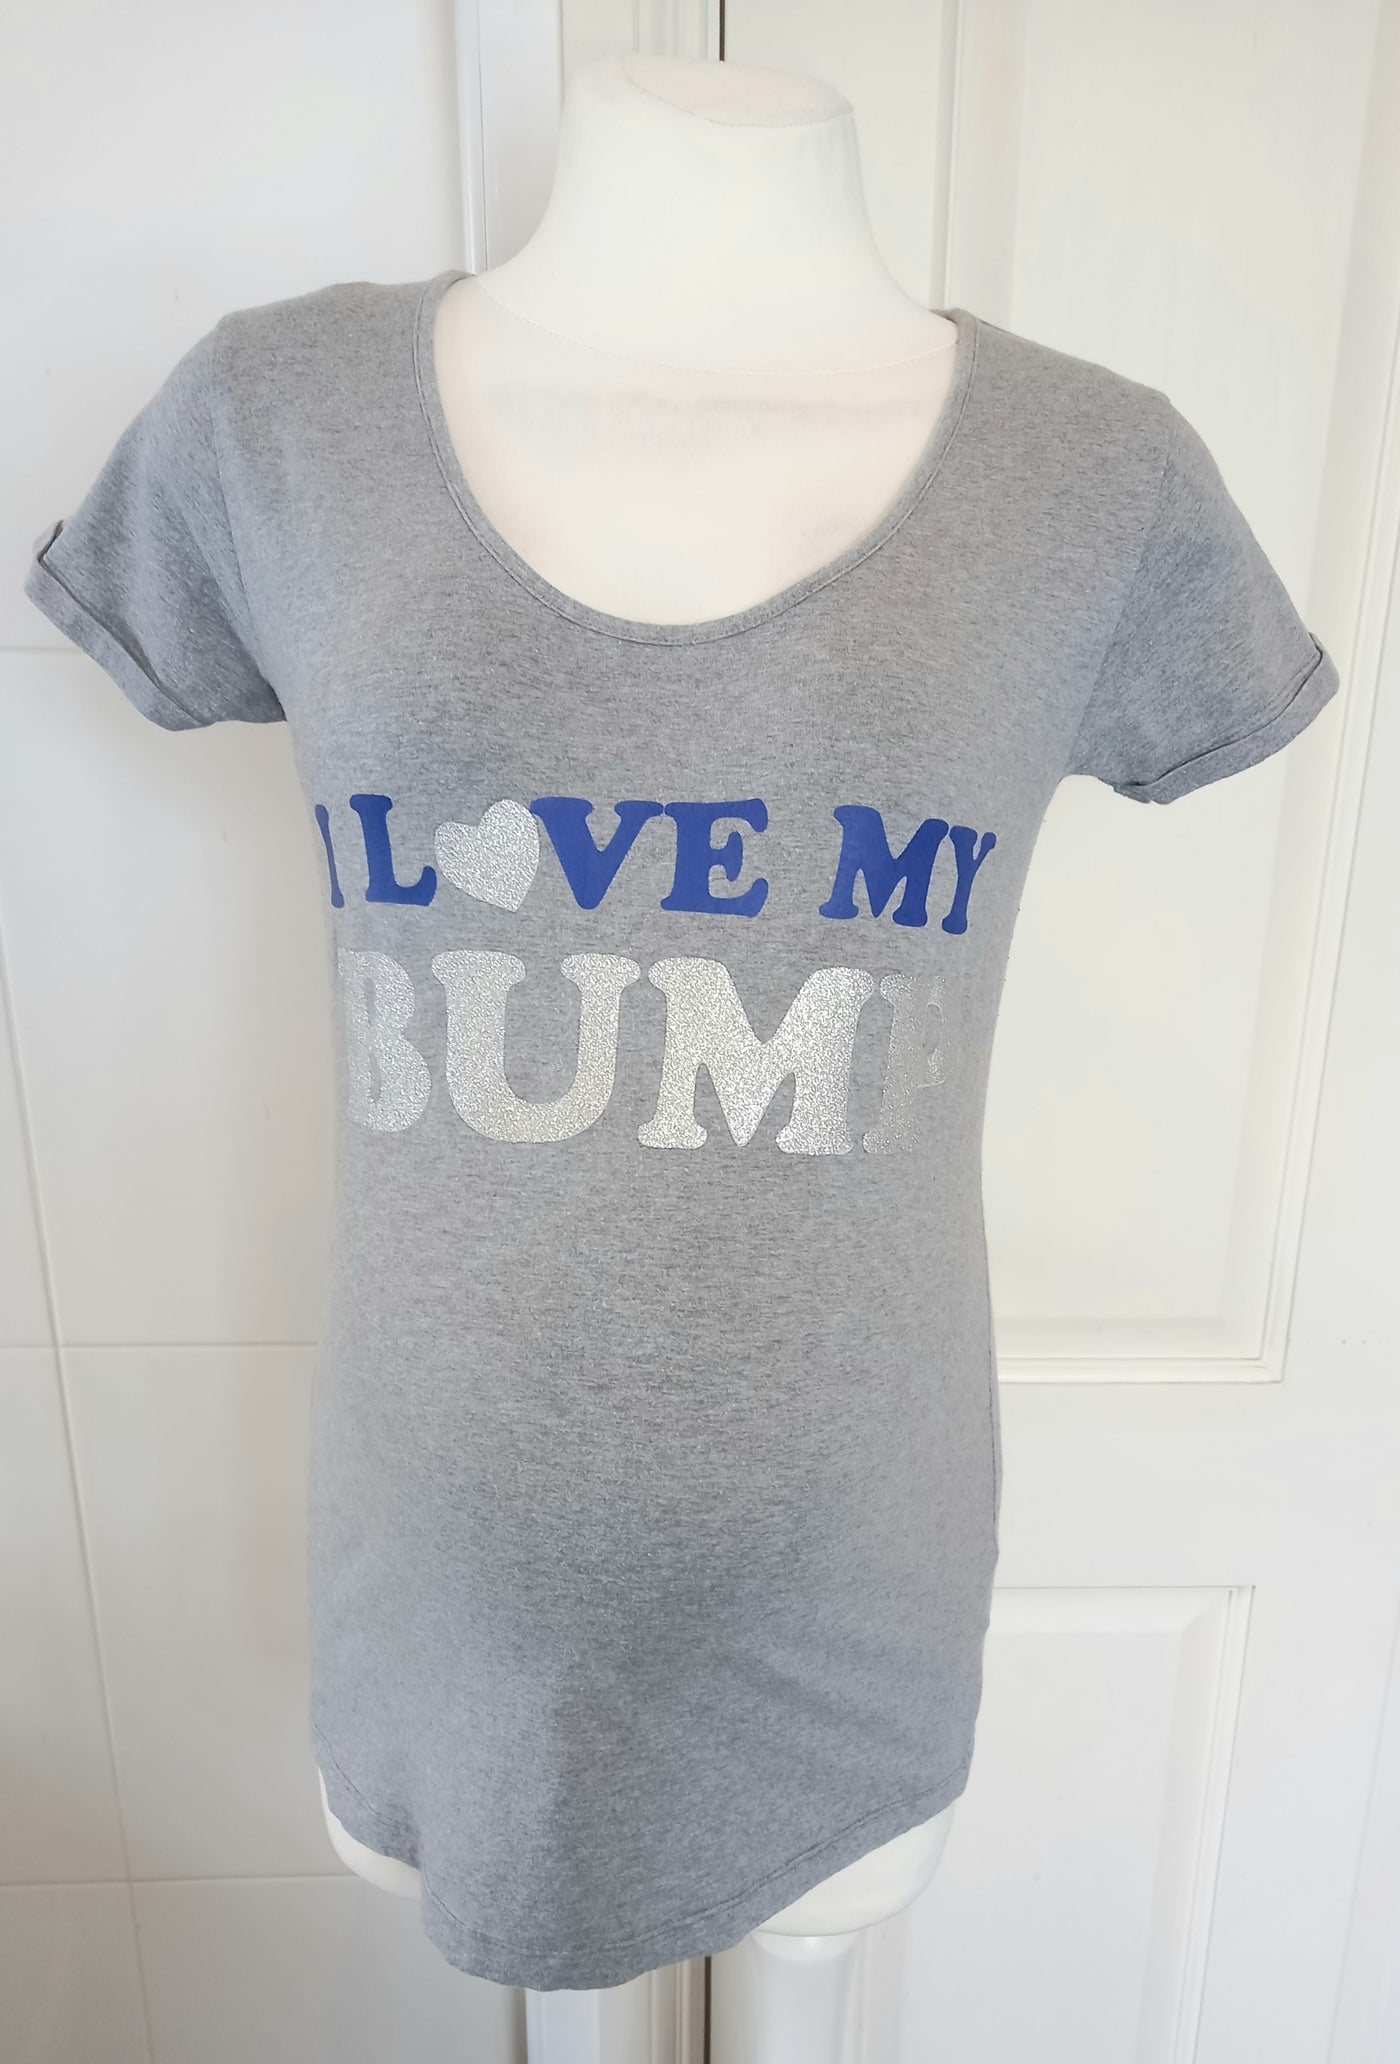 Blooming Marvellous Grey 'I Love My Bump' T-Shirt - Size M (Approx UK 10/12)